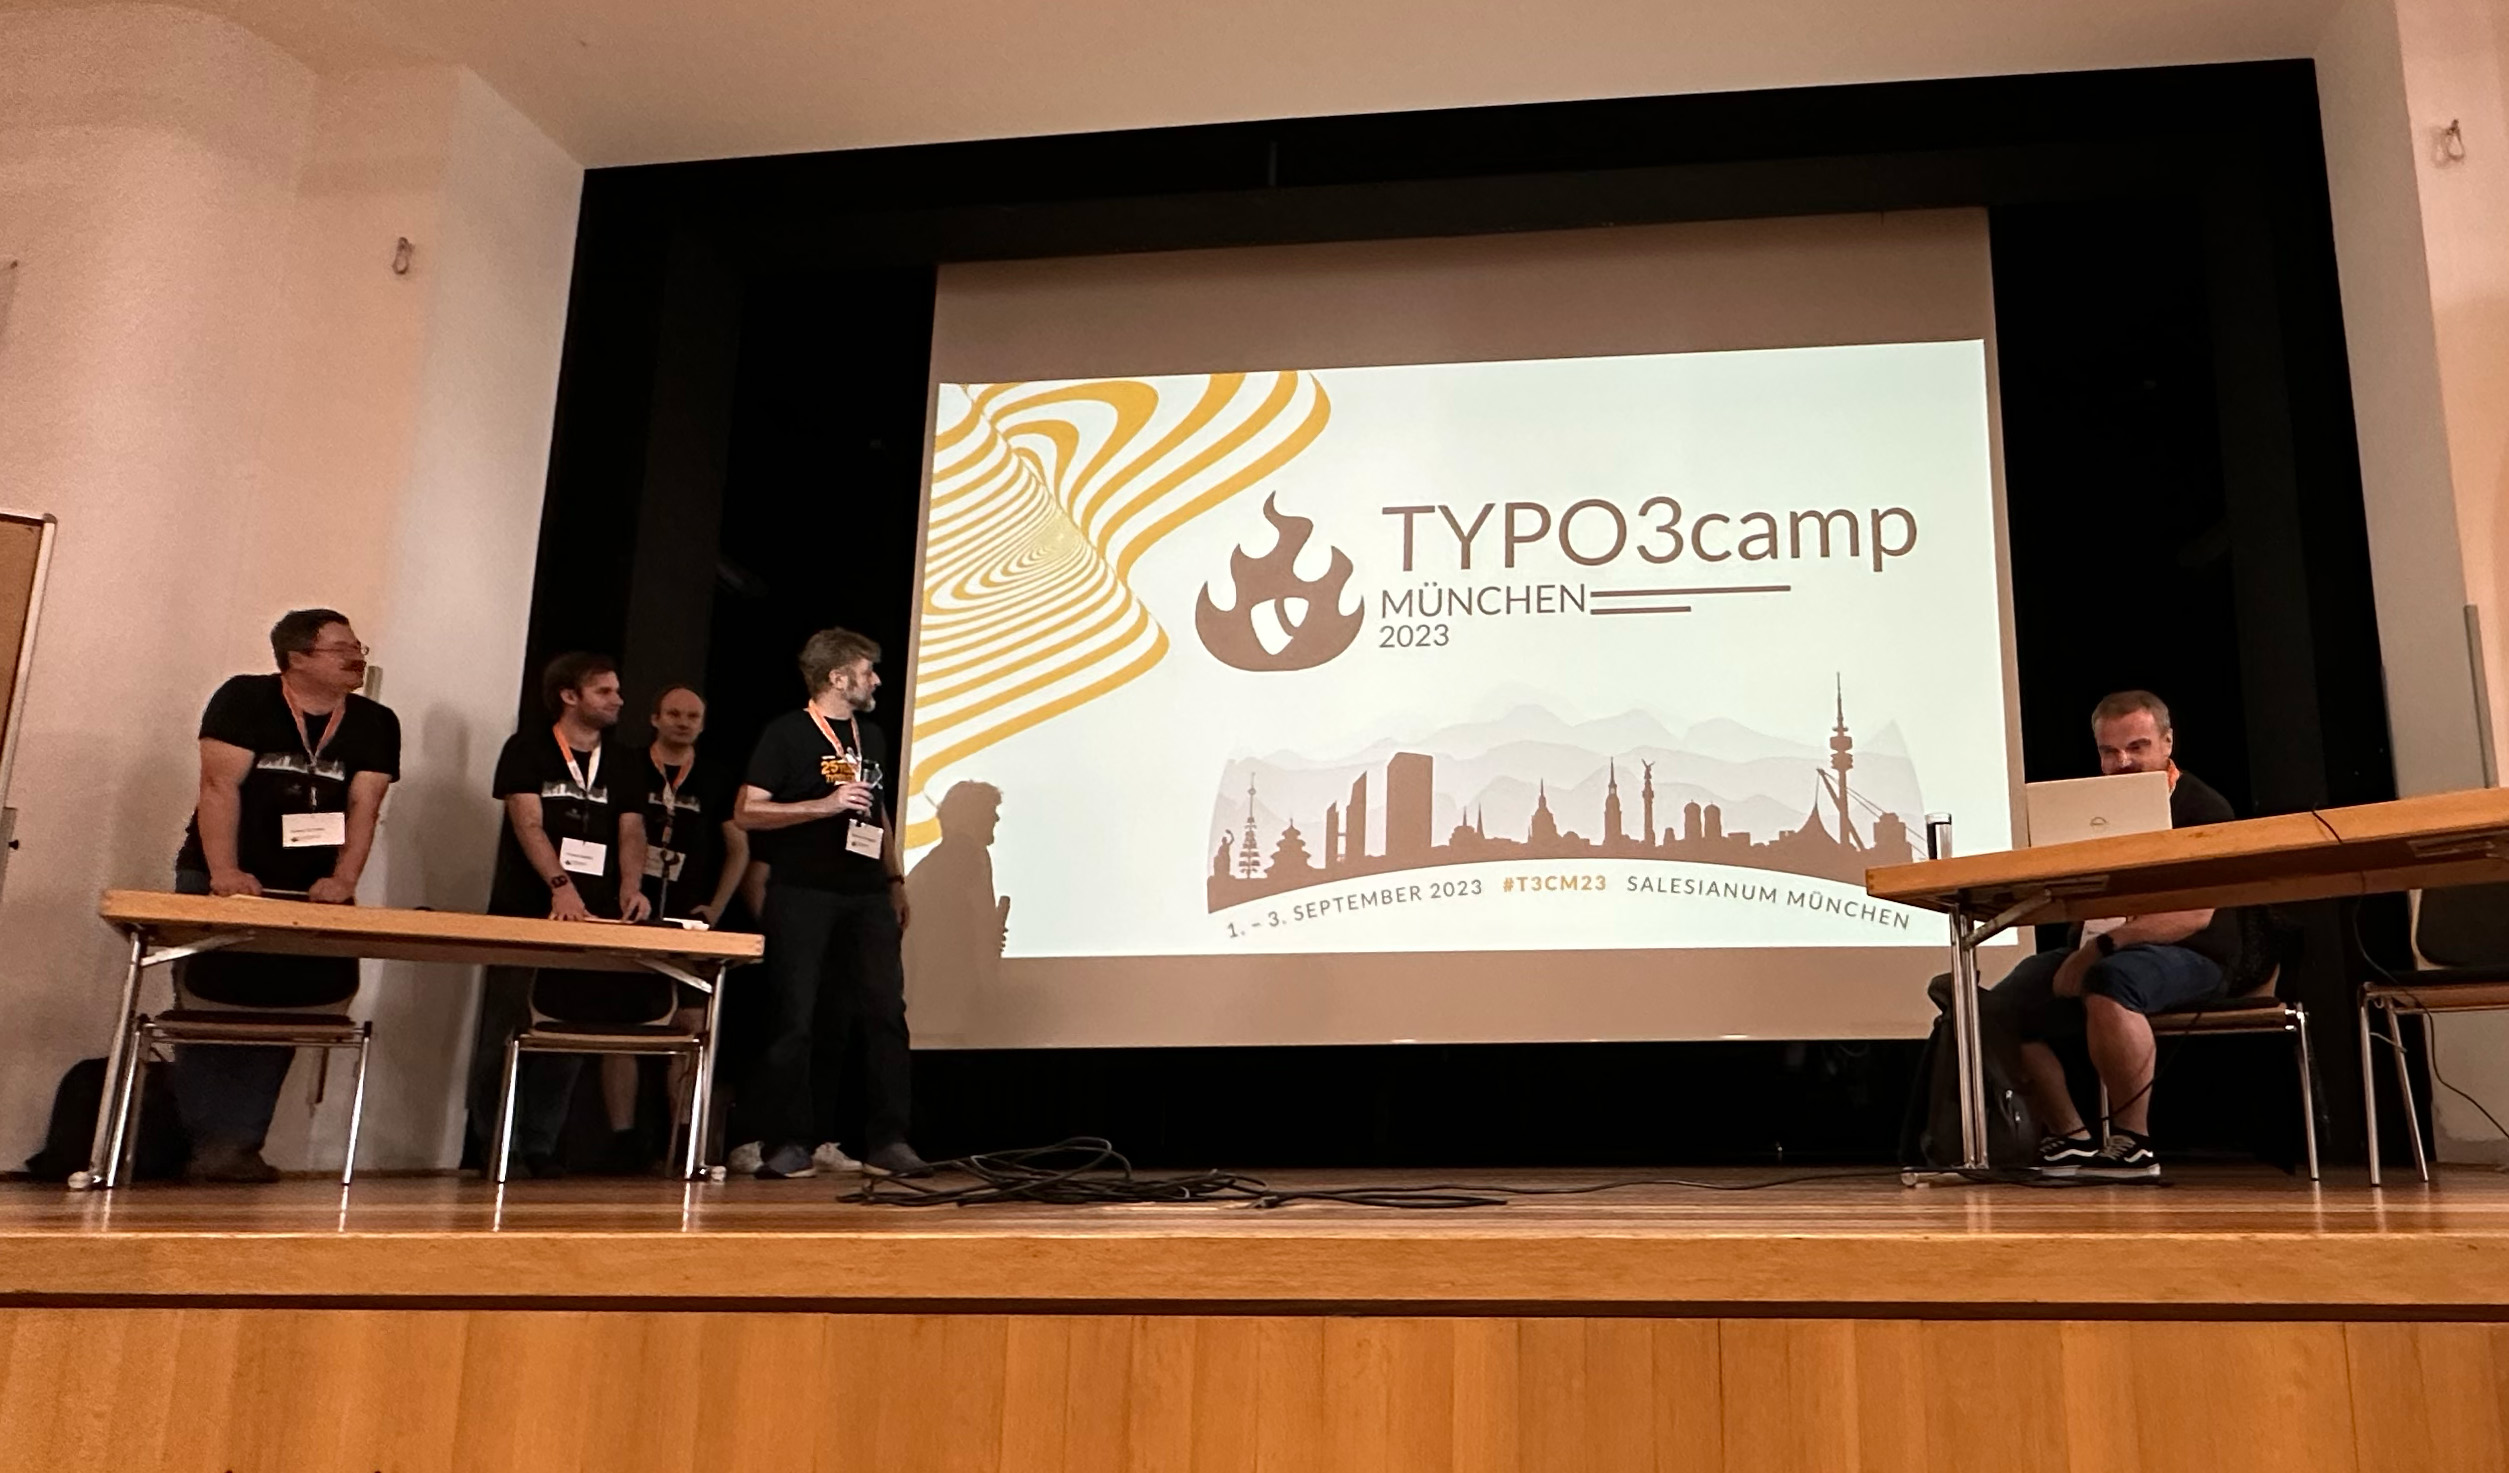 You are currently viewing Recap TYPO3camp München 2023 #t3cm #t3cm23